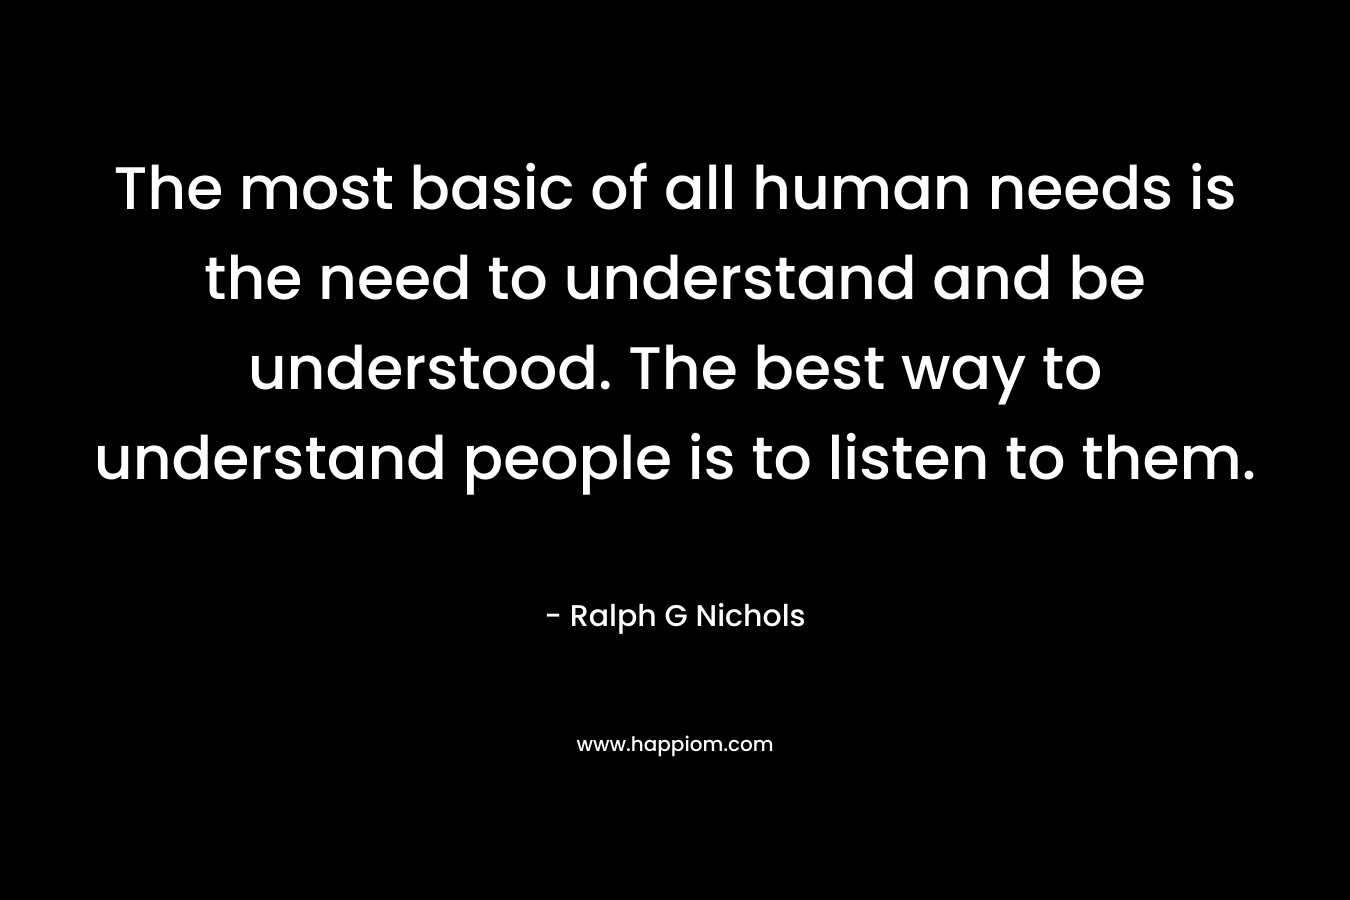 The most basic of all human needs is the need to understand and be understood. The best way to understand people is to listen to them. – Ralph G Nichols